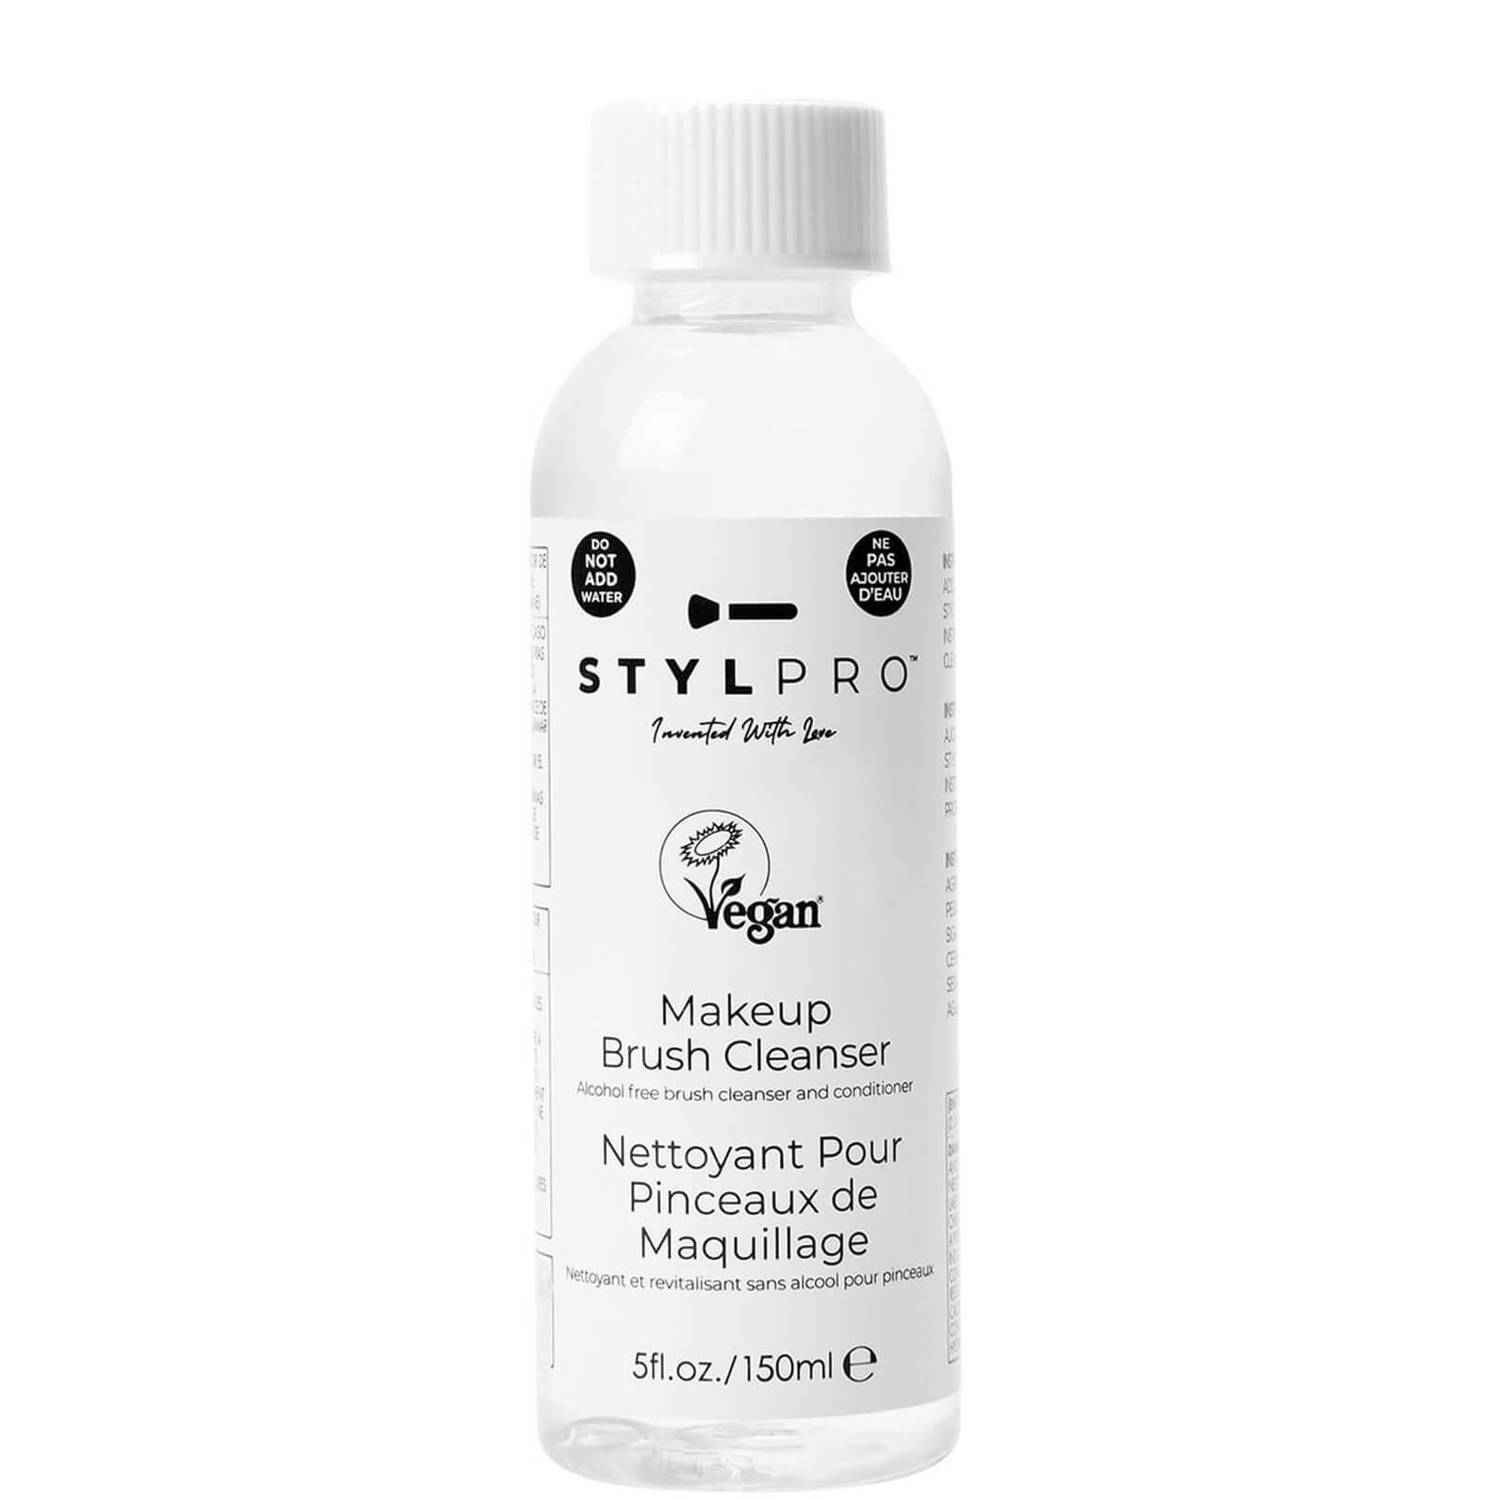 Stylpro Brush Cleanser